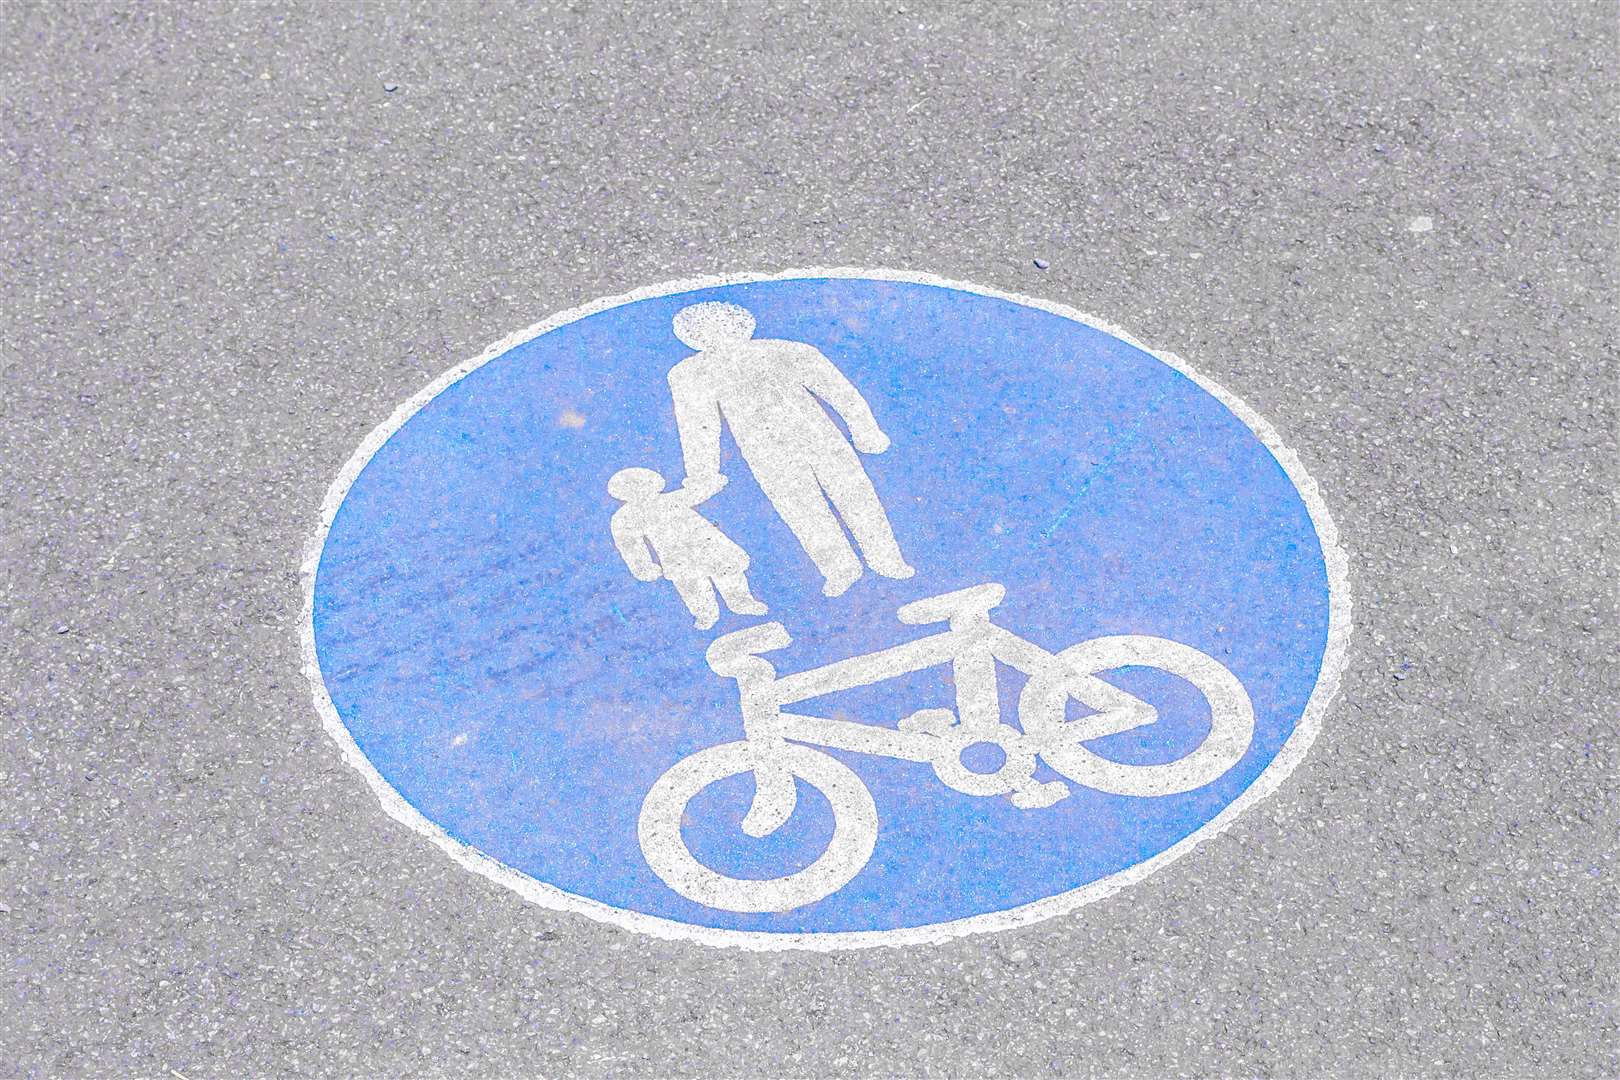 A Nestrans survey has shown a large increase in people walking and cycling.